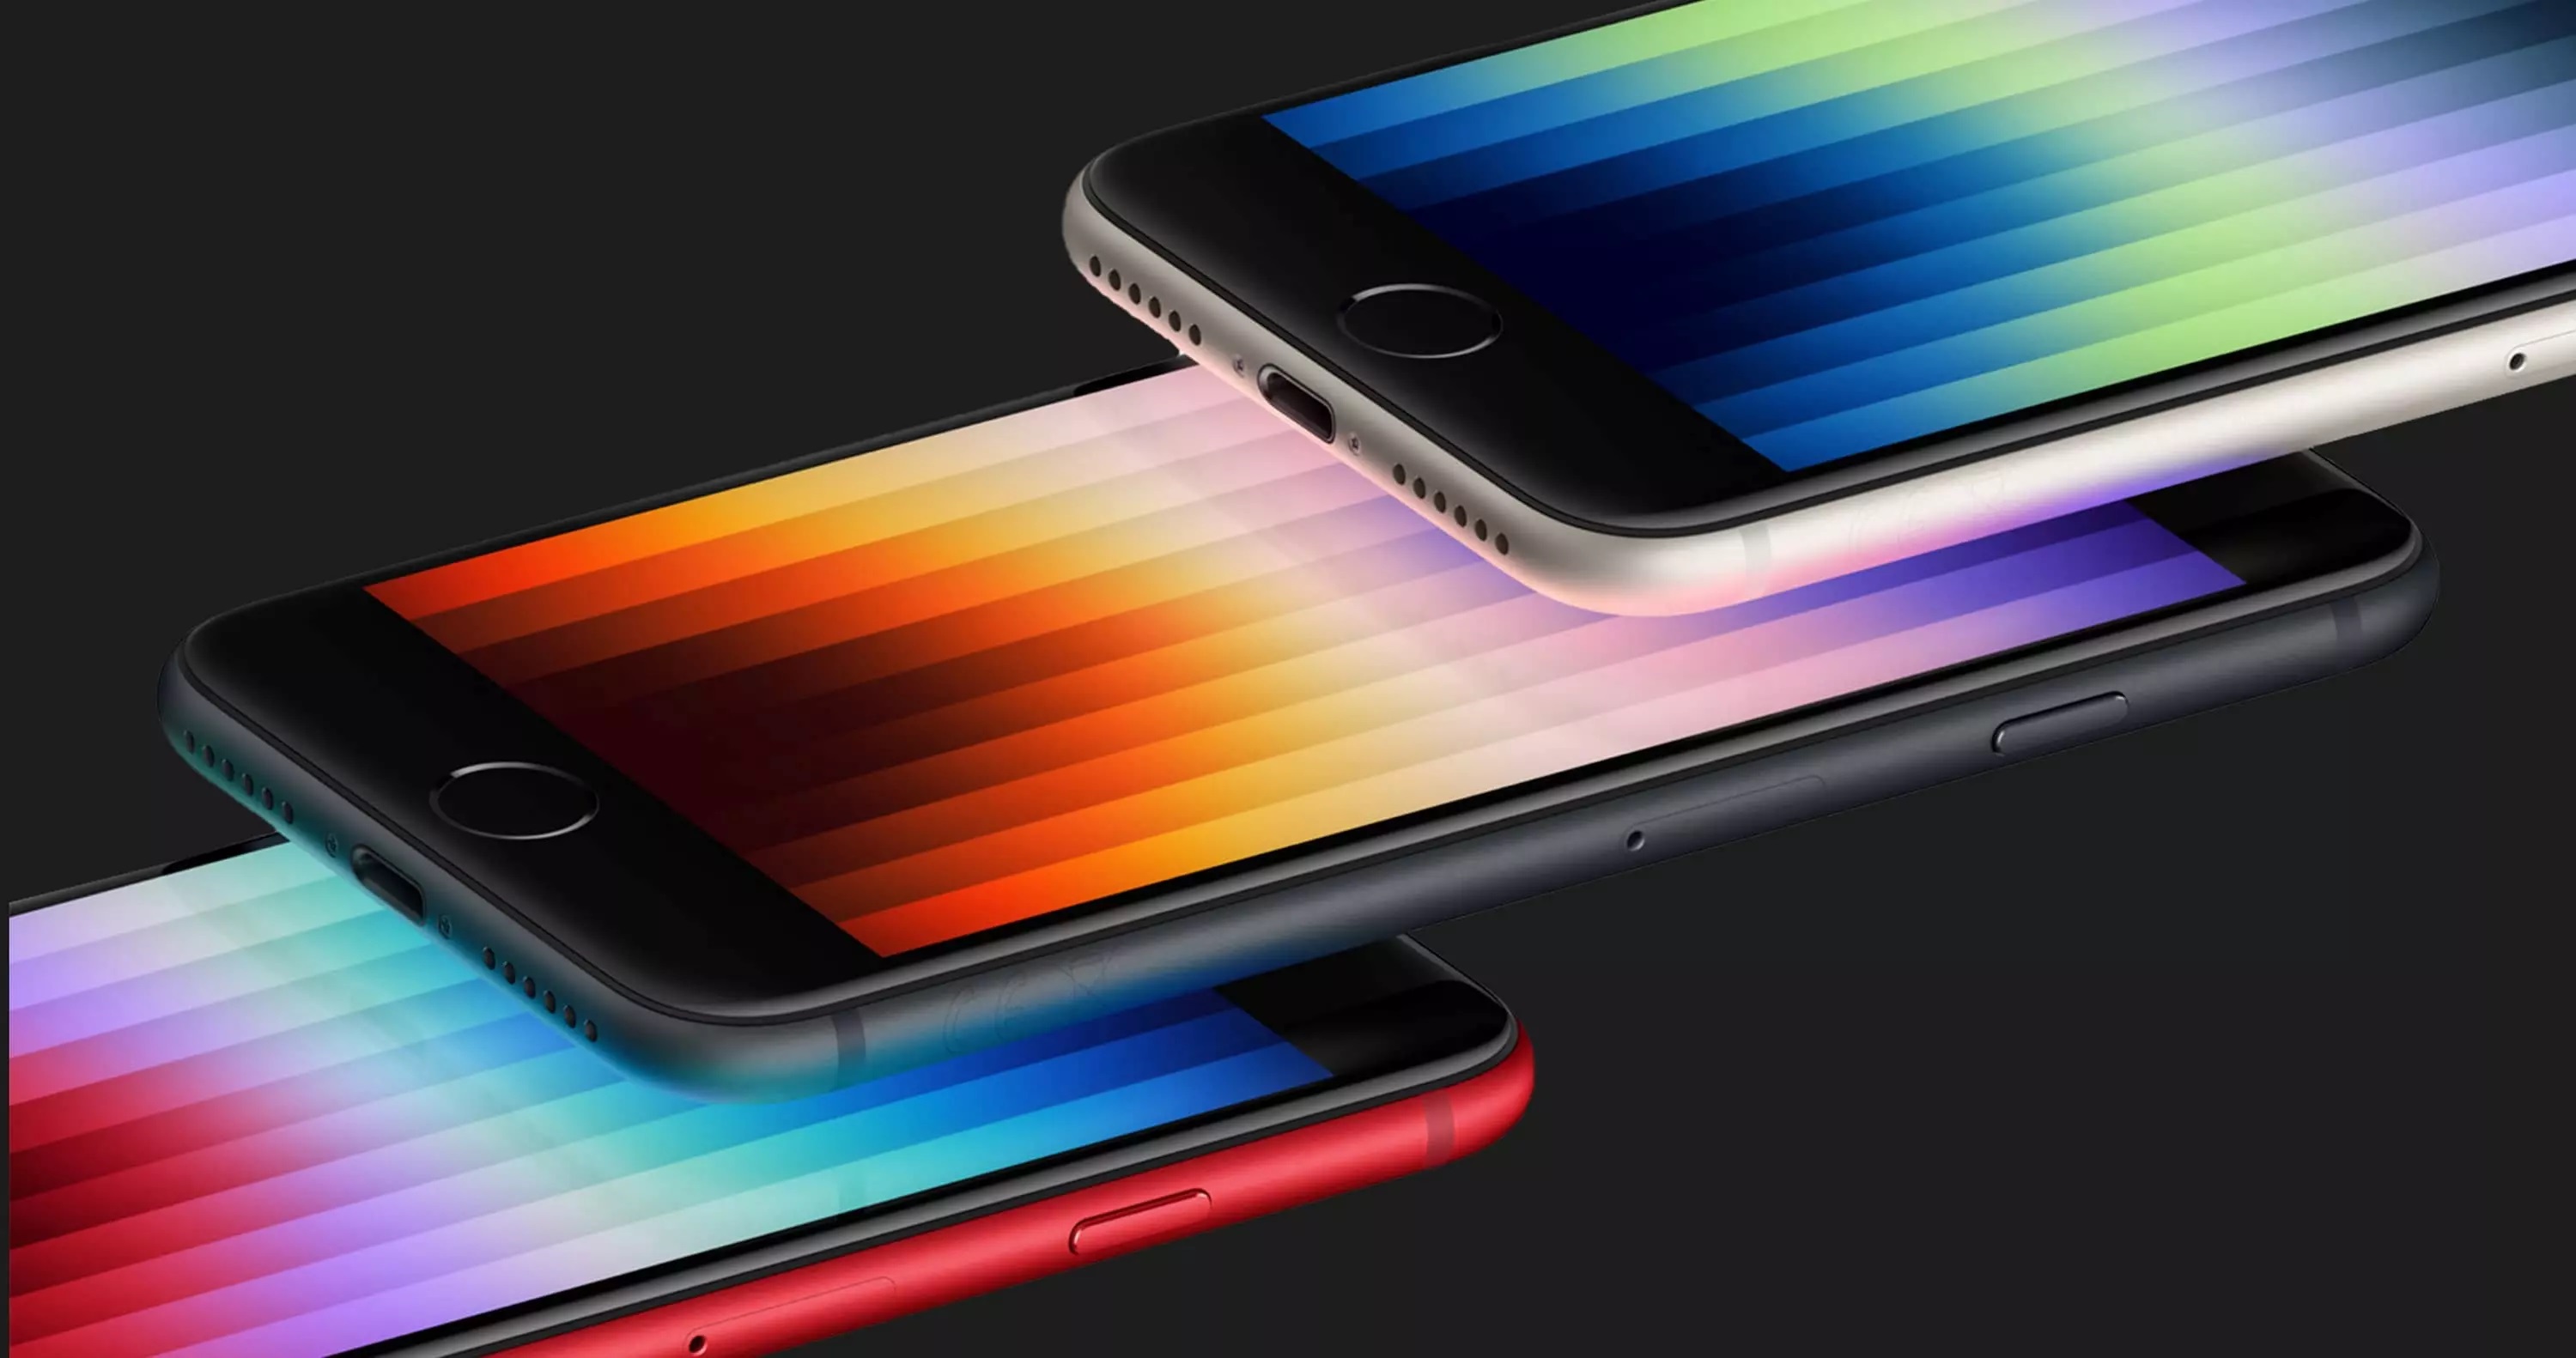 Apple is finally preparing the new iPhone SE: suppliers have already started fighting to supply OLED displays